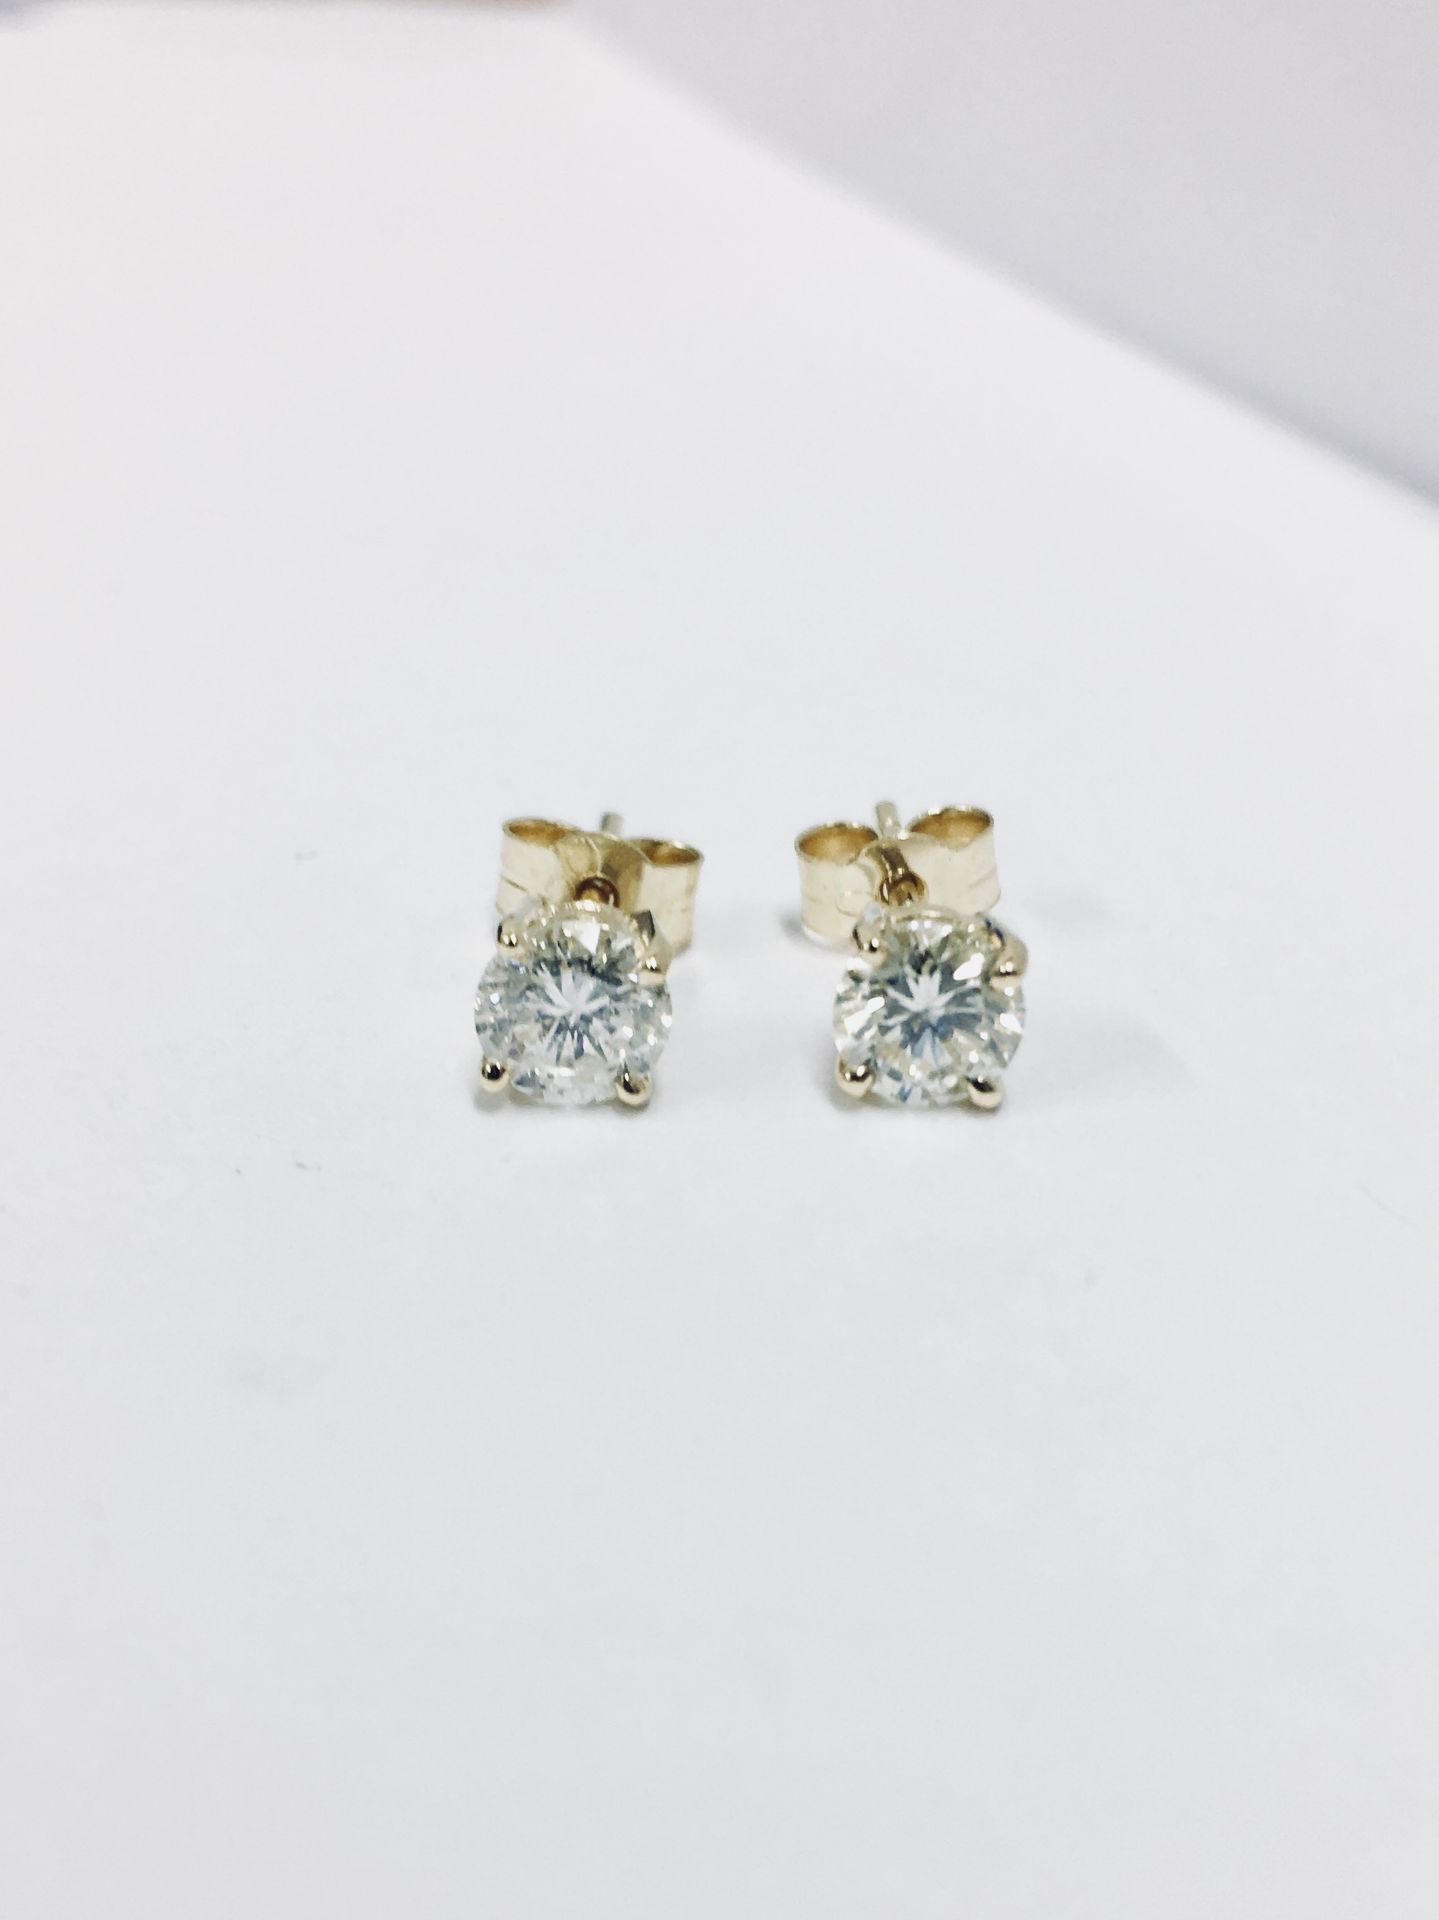 1.40Ct Diamond Solitaire Earrings Set With Brilliant Cut Diamonds, - Image 18 of 19